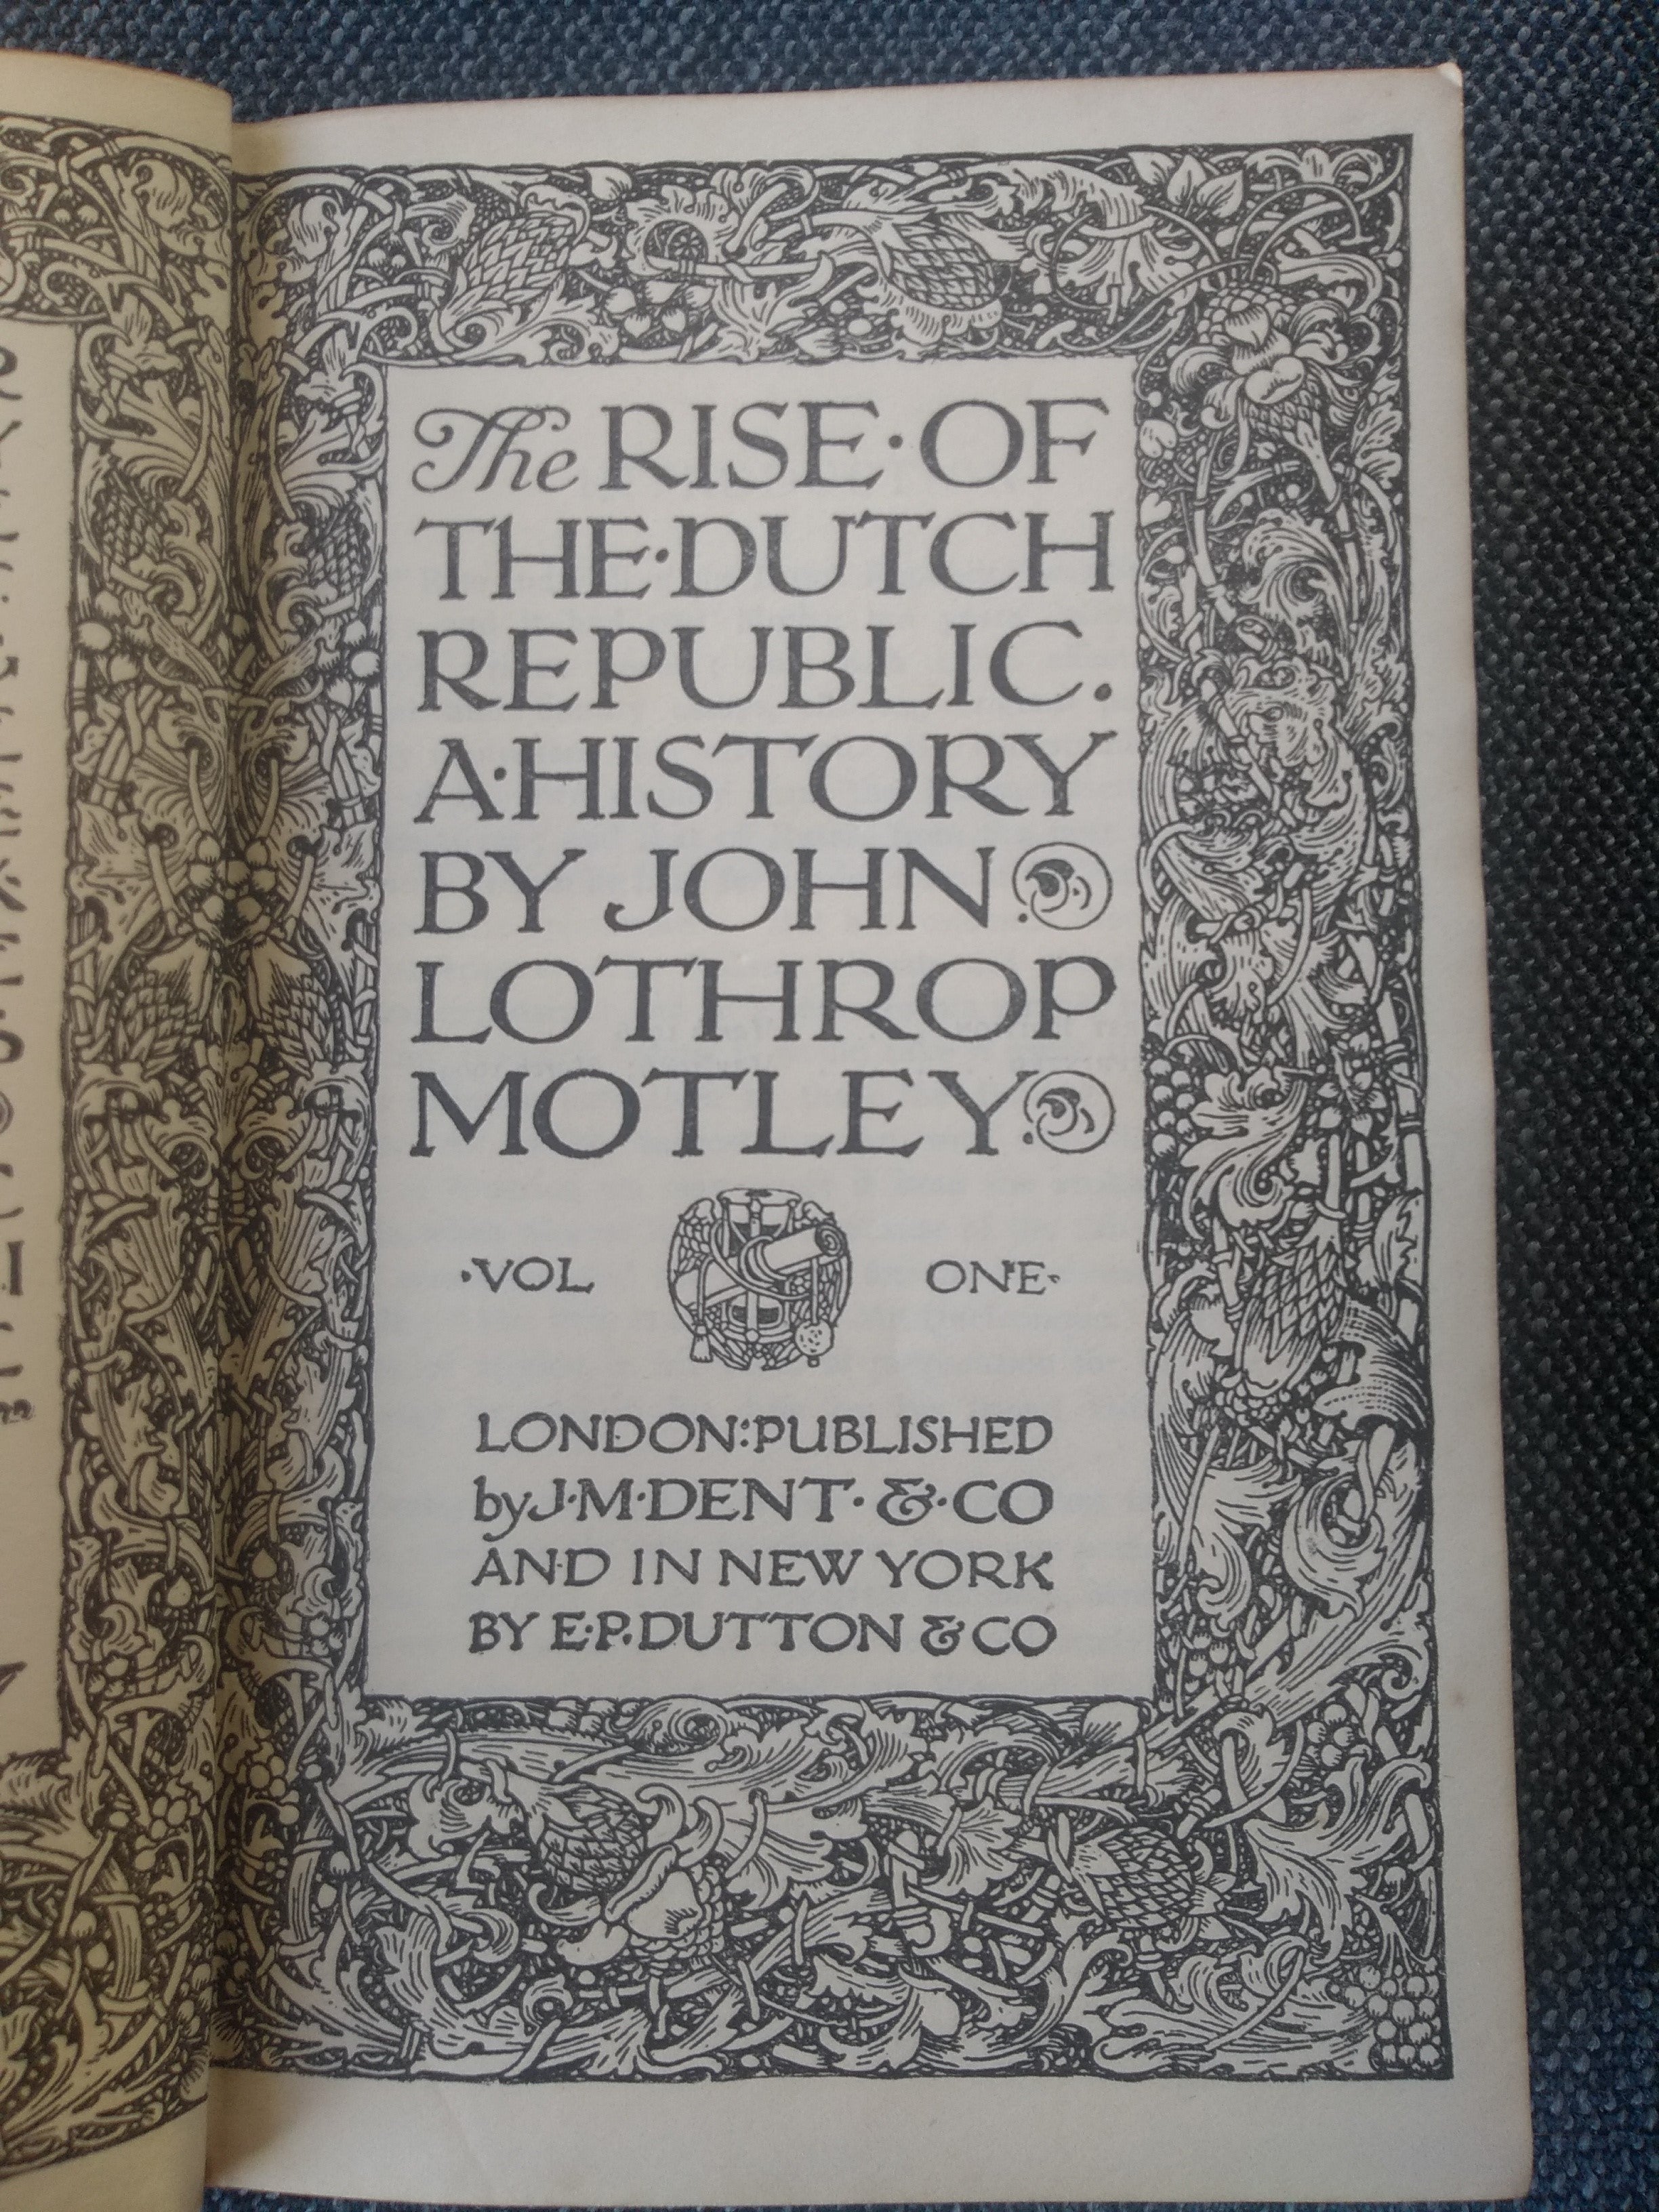 The Rise of the Dutch Republic: A History. Volume One, by John Lothrop Motley